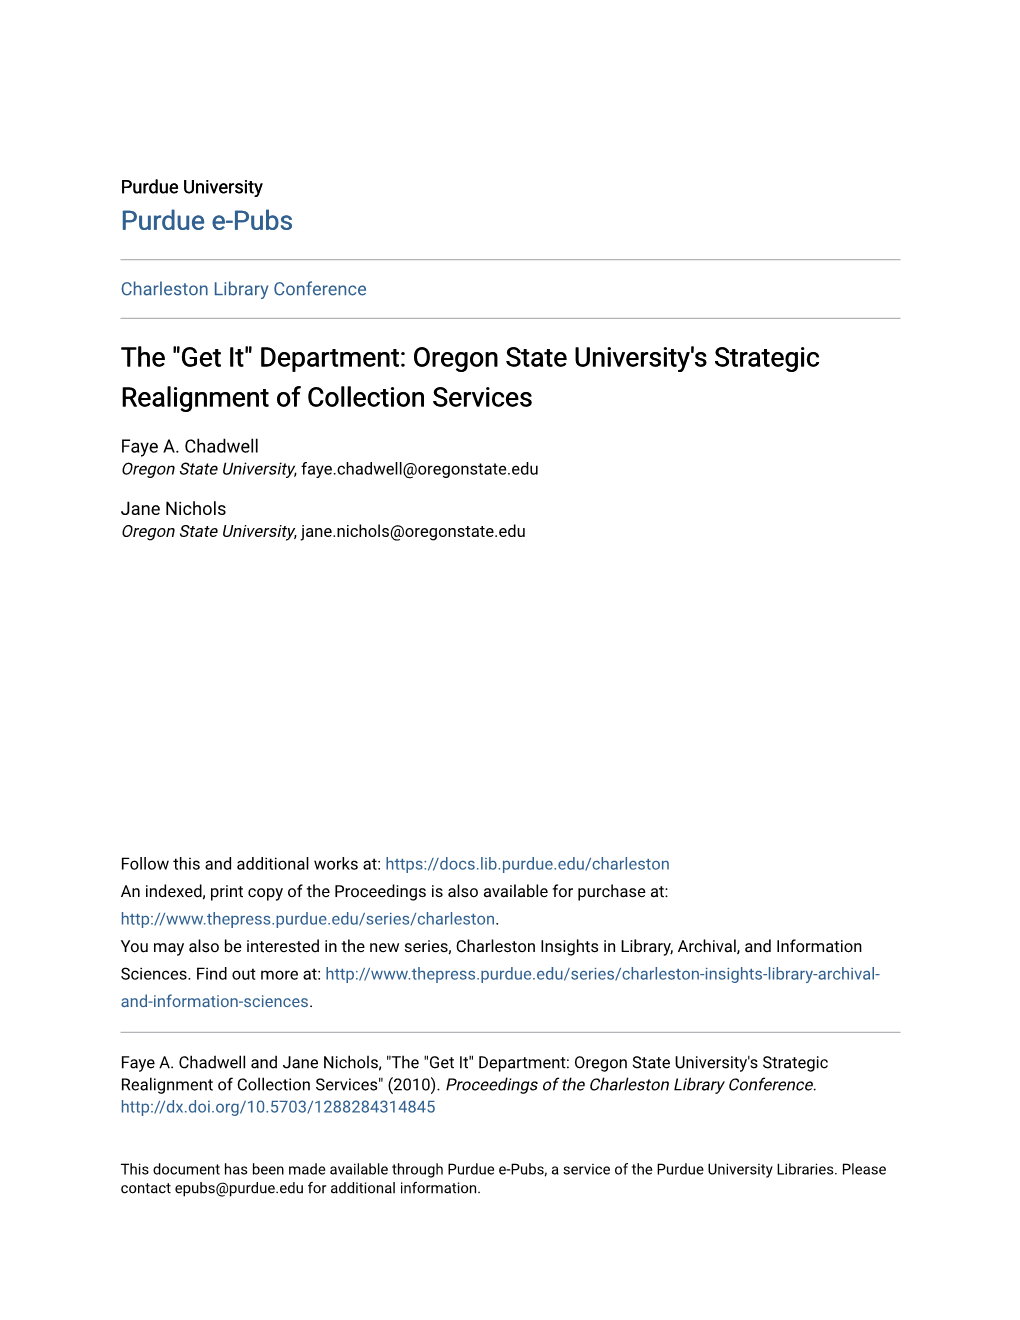 Department: Oregon State University's Strategic Realignment of Collection Services